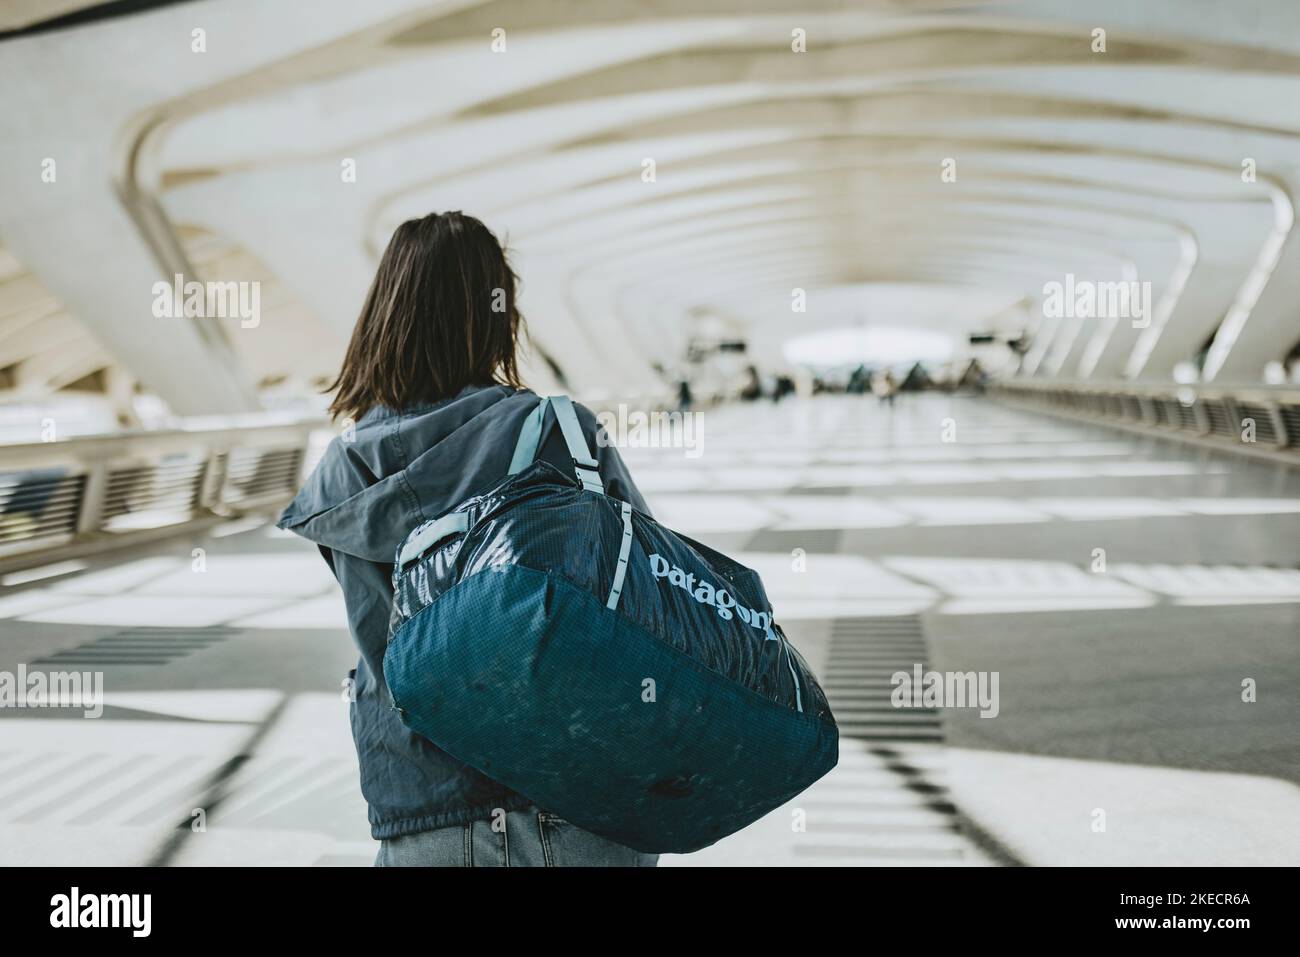 France, Lyon, airport, inside, woman with luggage, back view Stock Photo